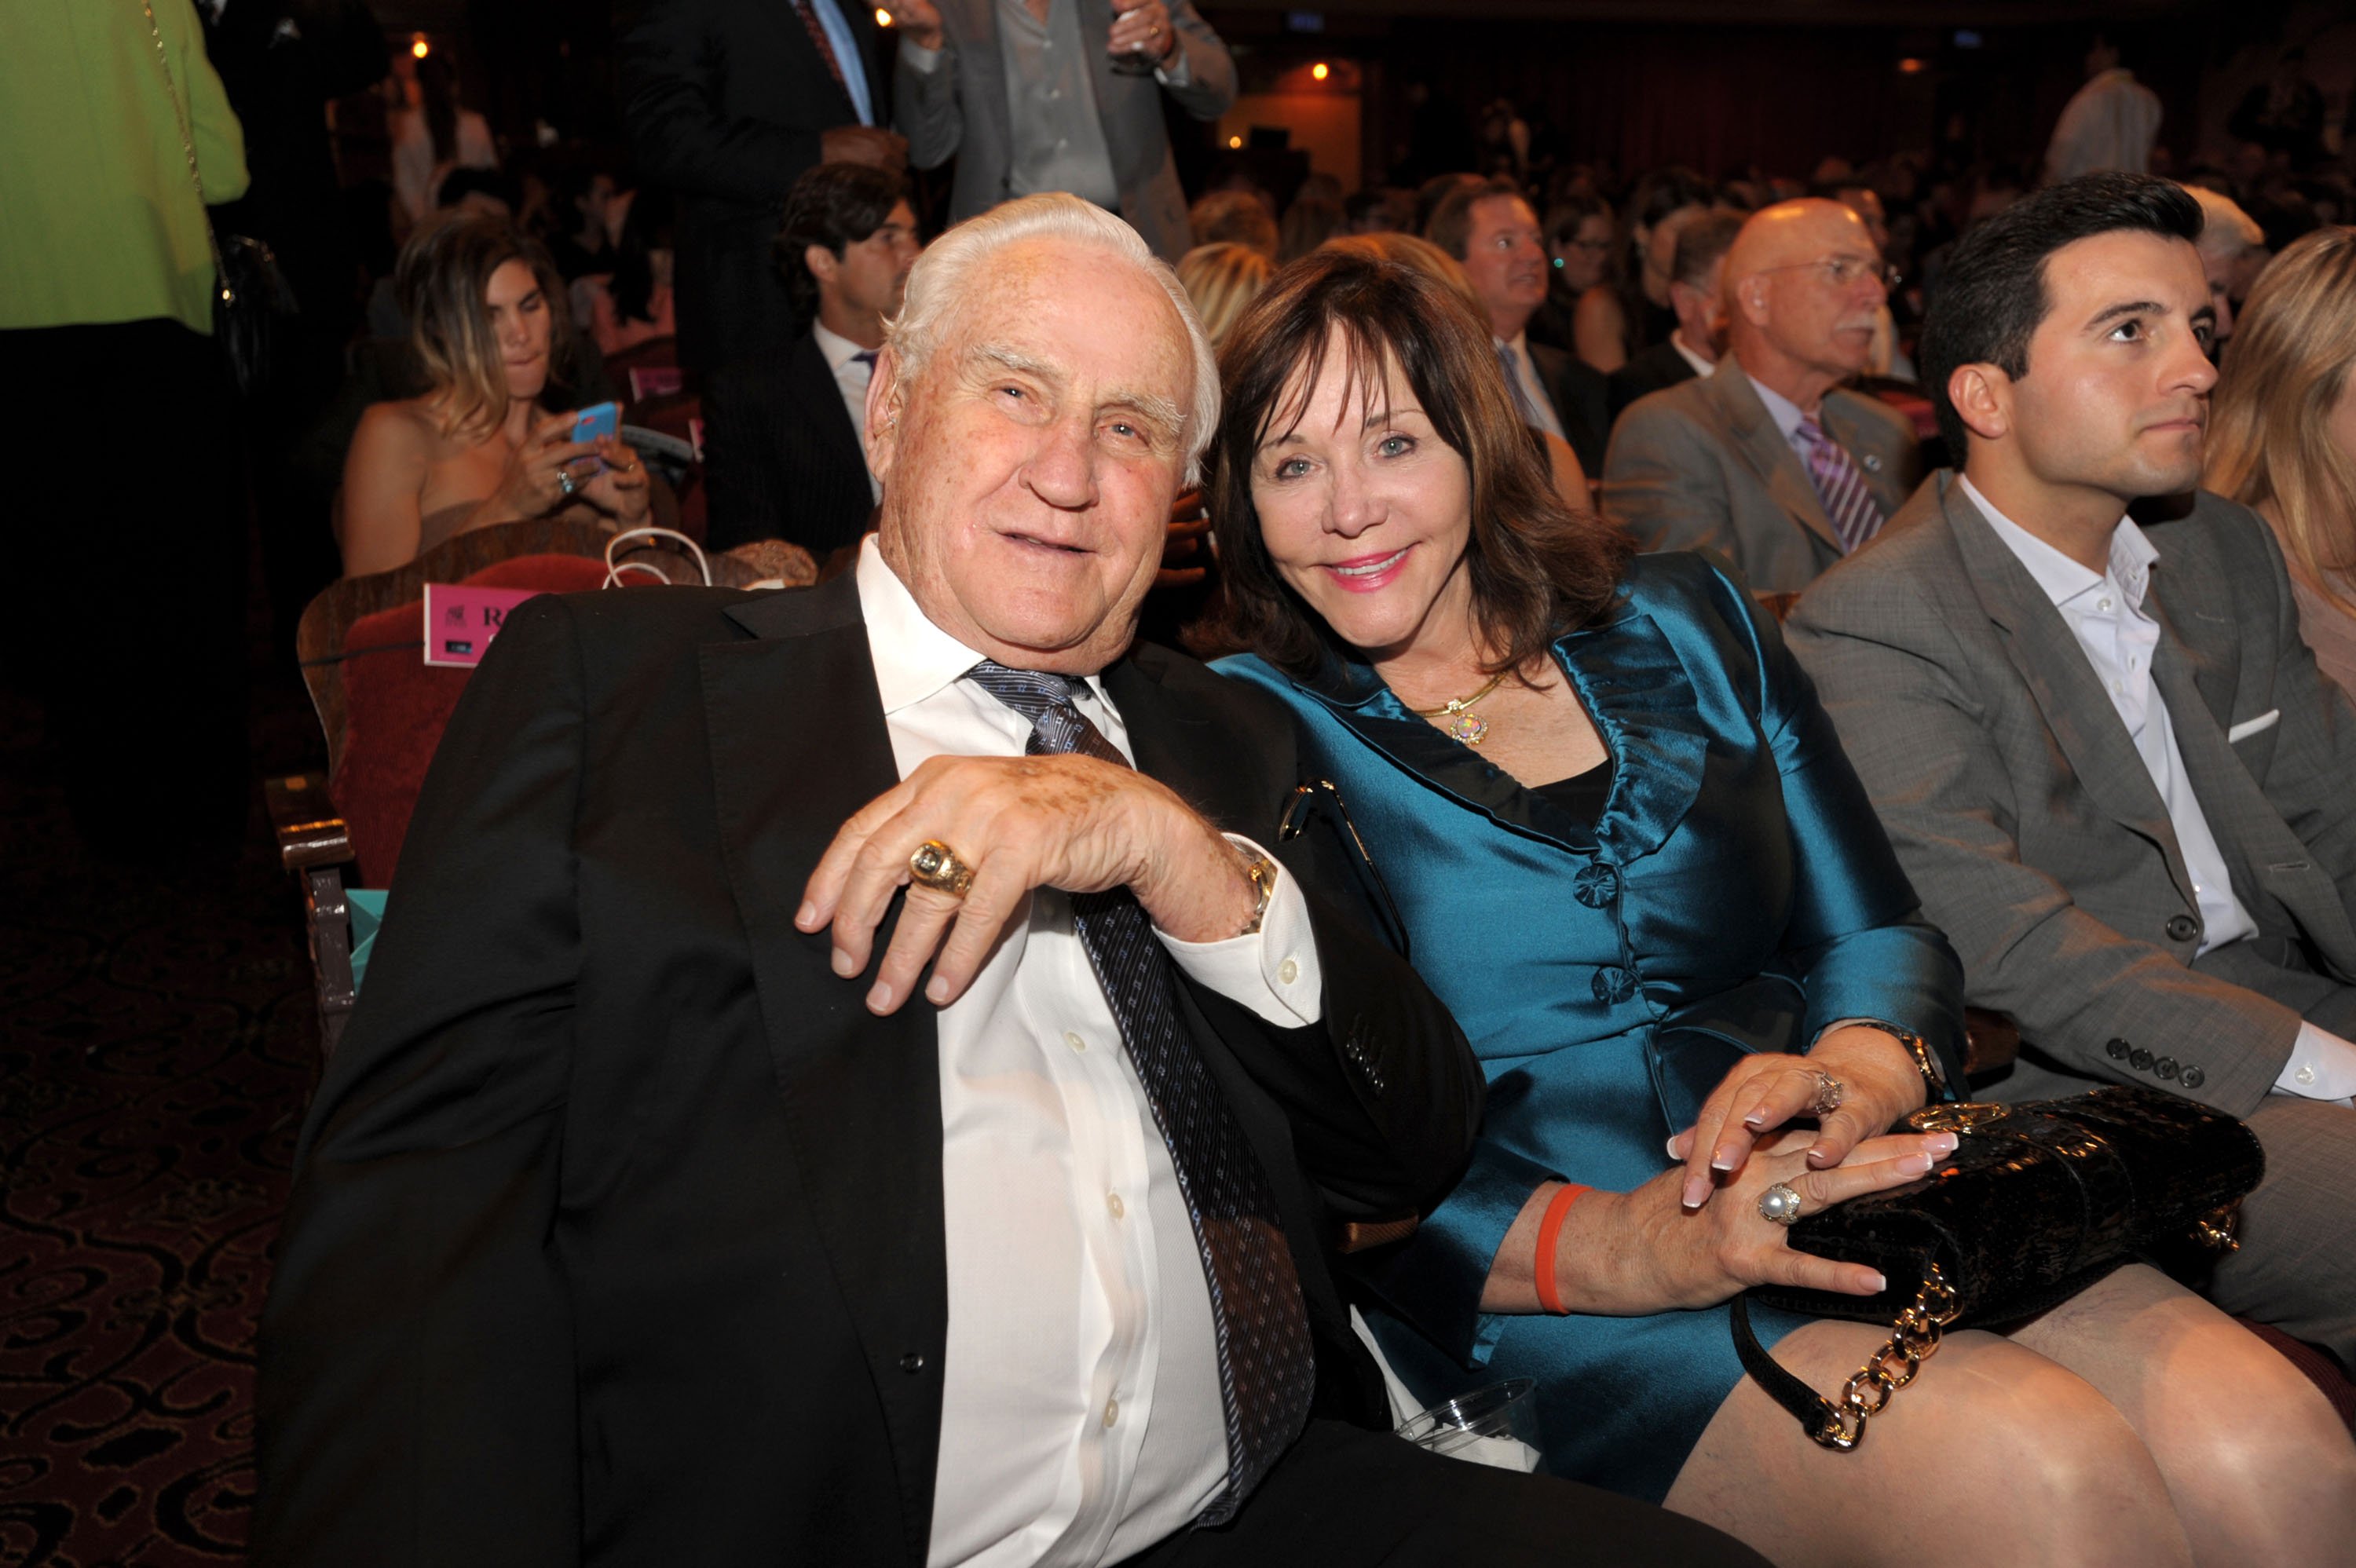 Don and Mary Anne Shula at the Miami International Film Festival presentation of "An Unbreakable bond" on March 11, 2014 | Photo: World Red Eye/Wikimedia